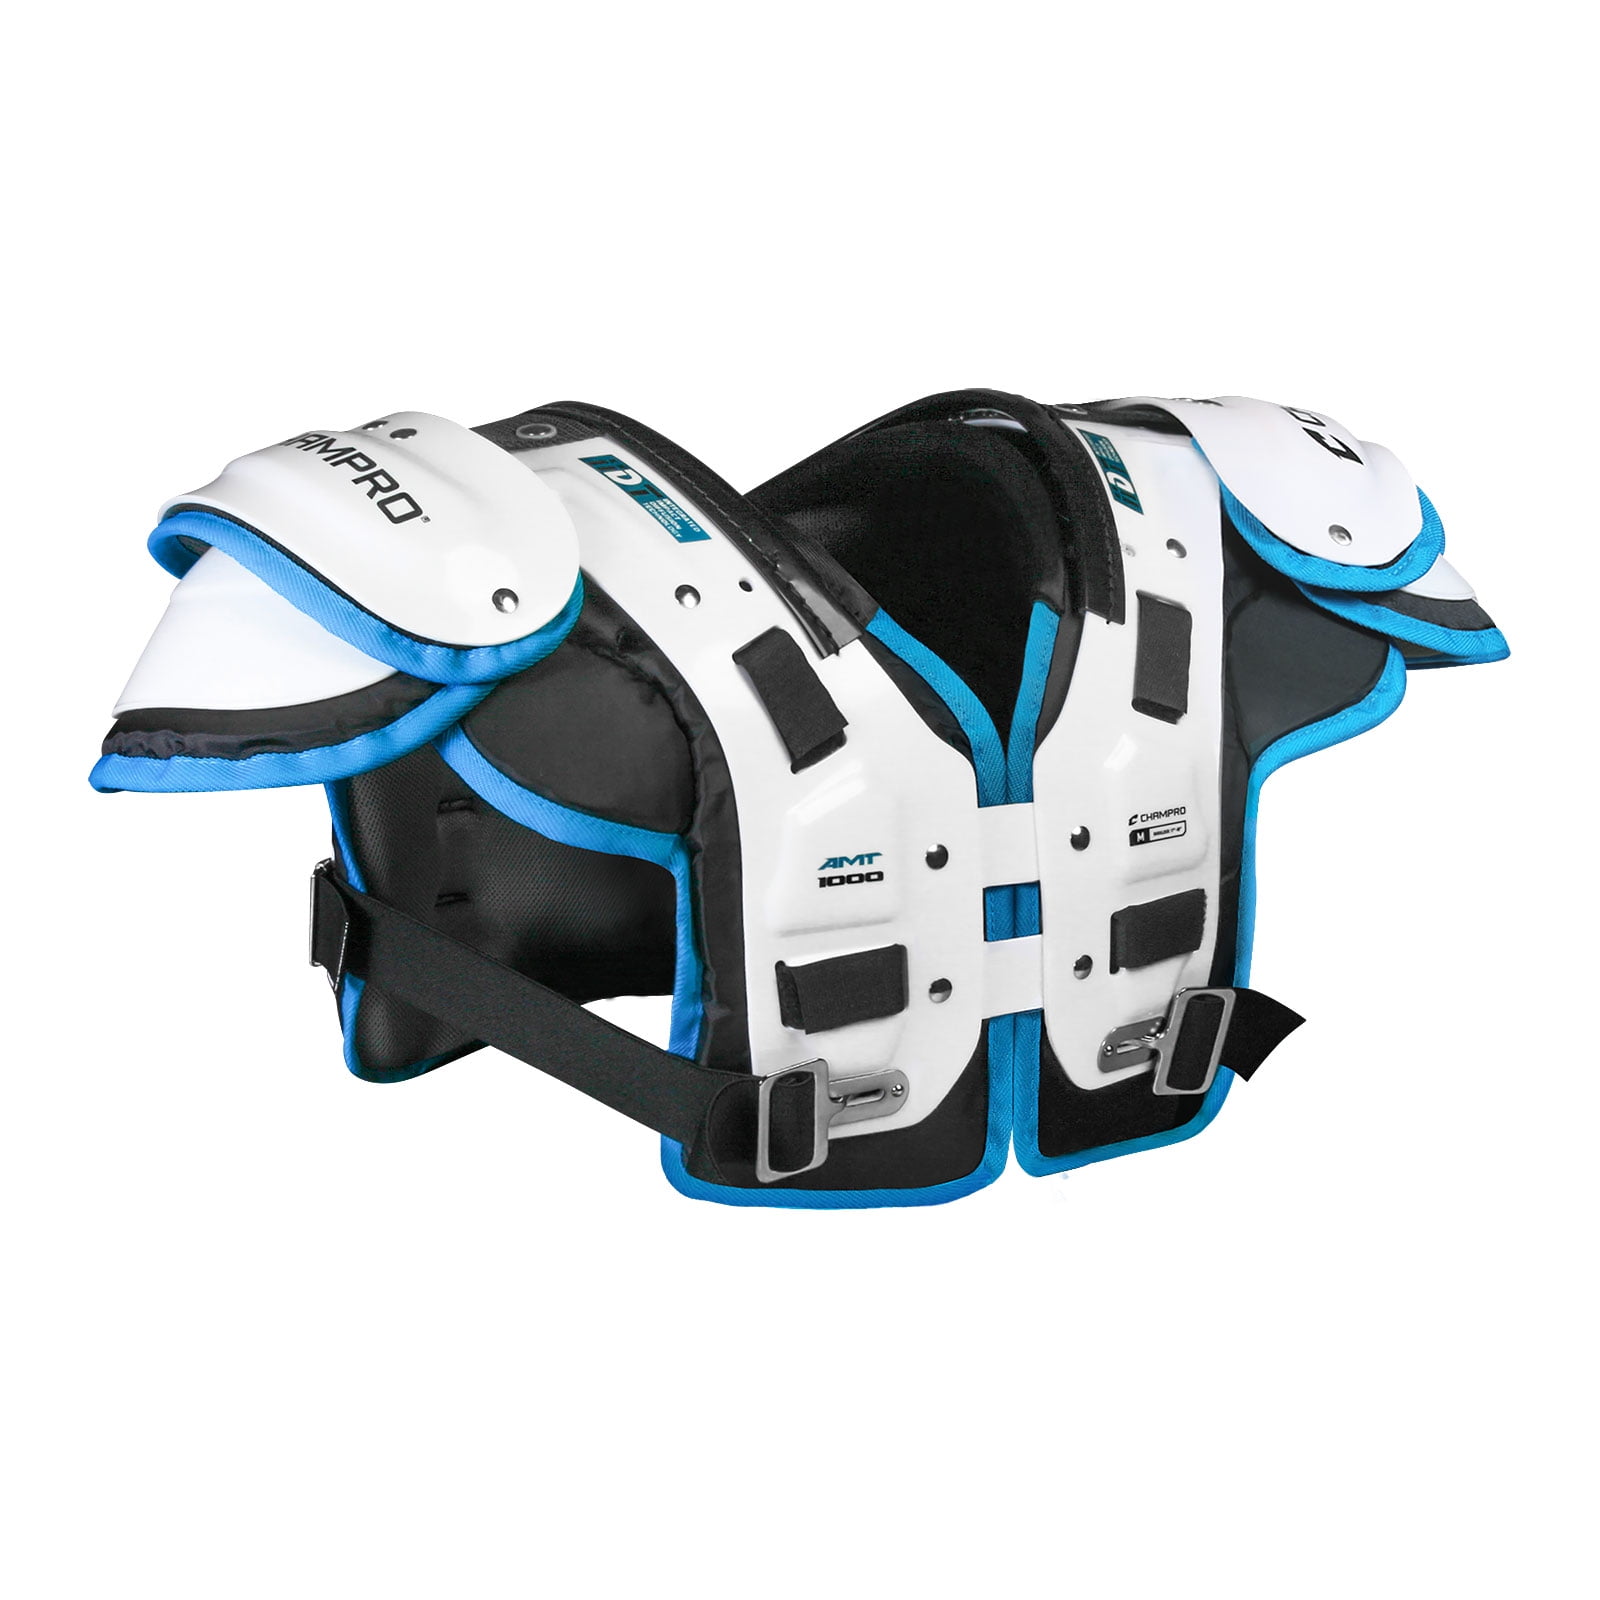 Champro AMT-1000 Adult Football Shoulder Pads All Sizes 